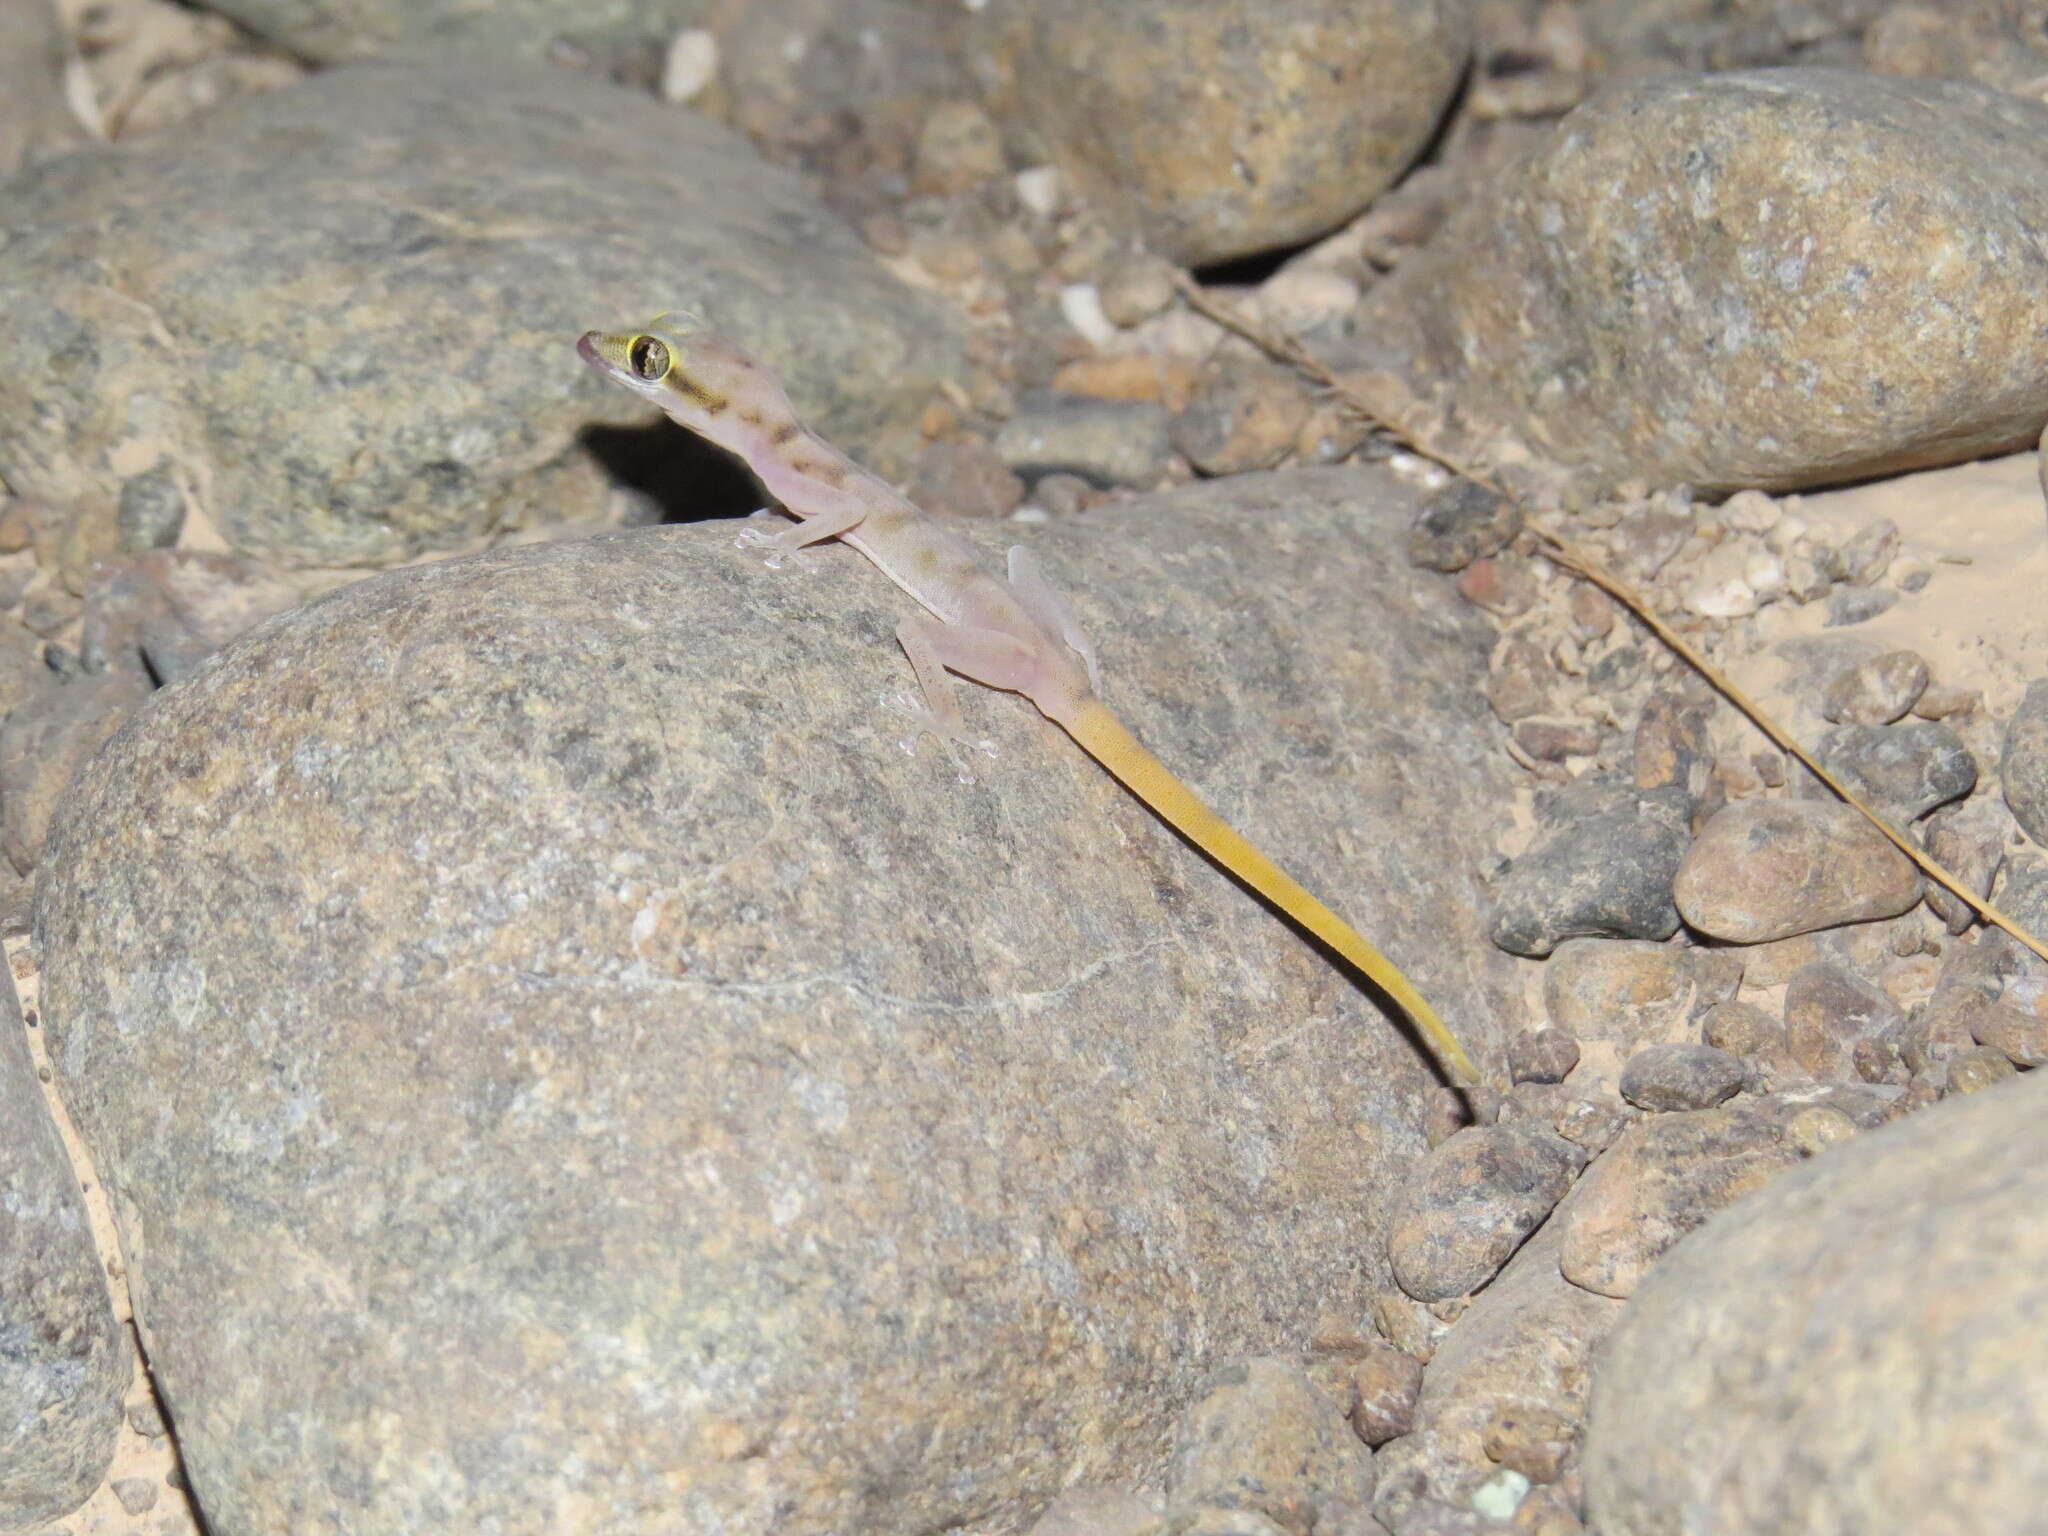 Image of Gallagher's Gecko